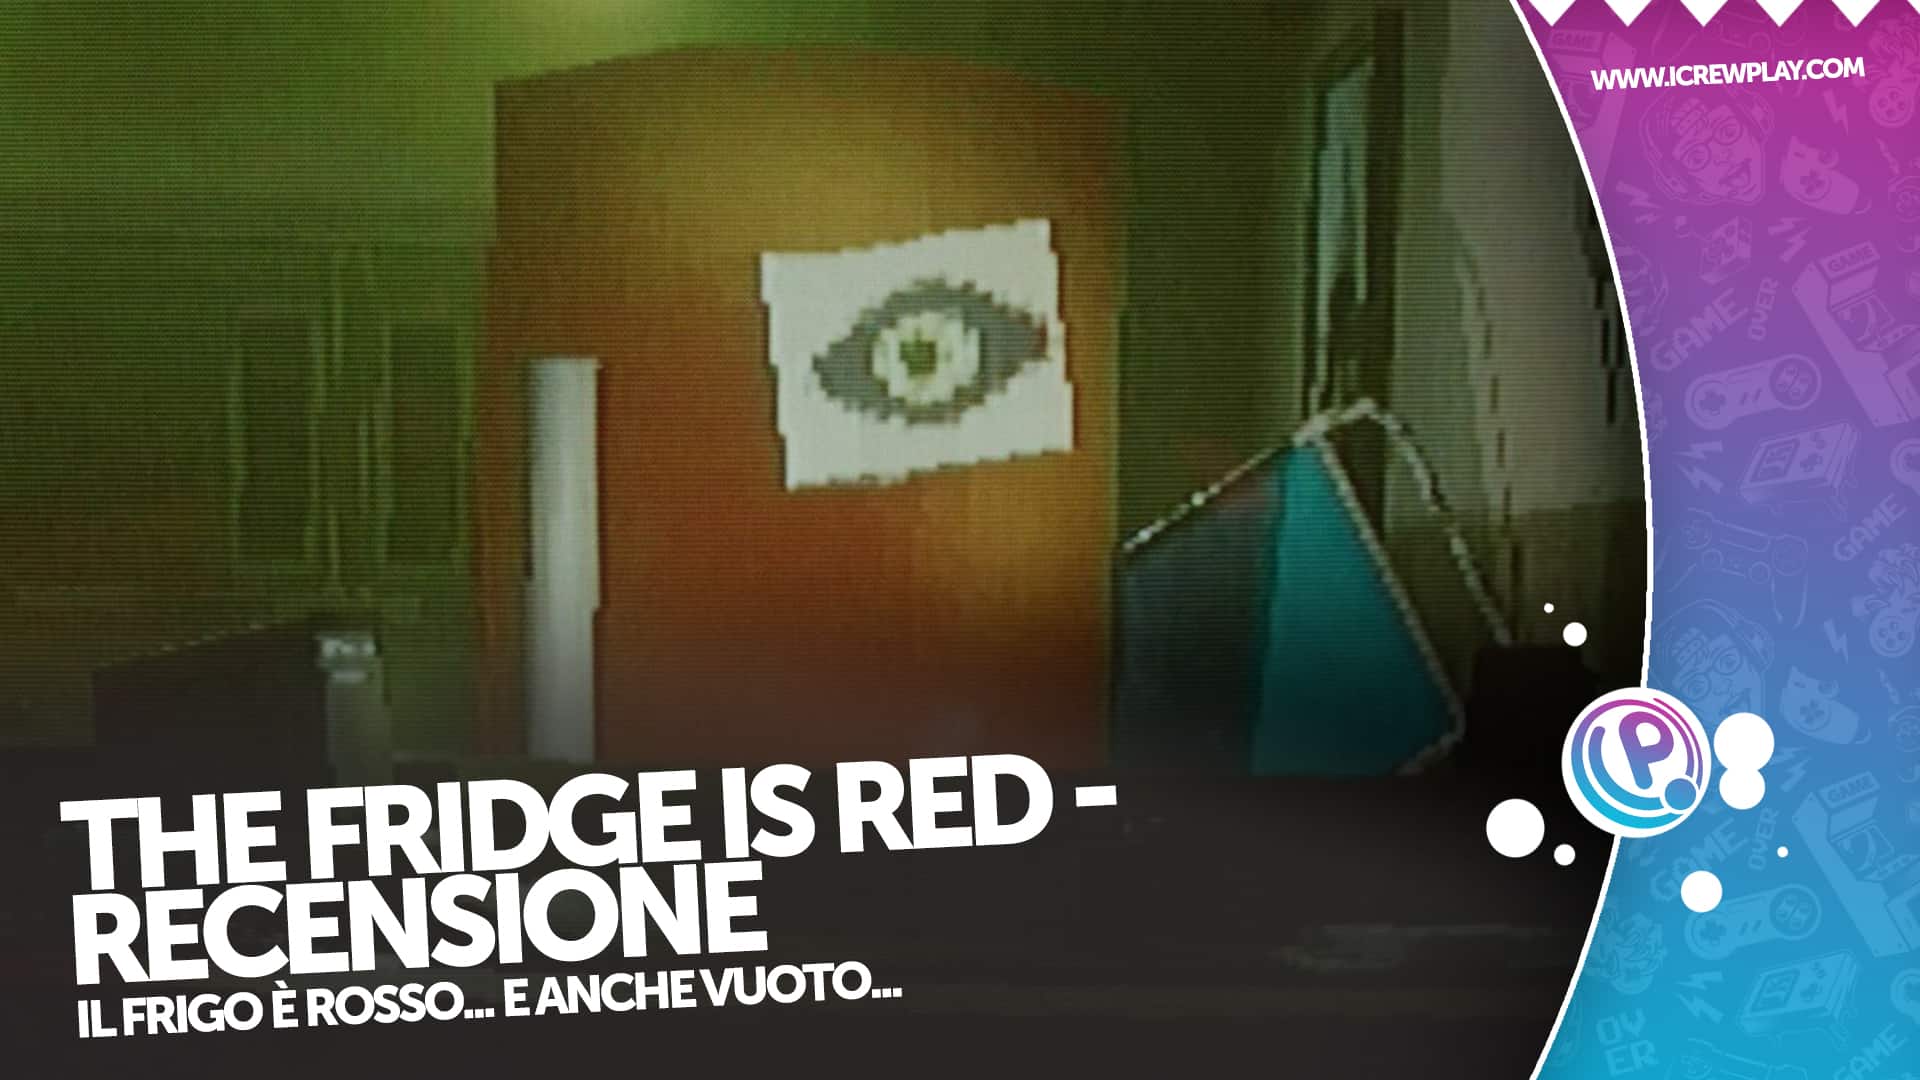 The fridge is red Recensione